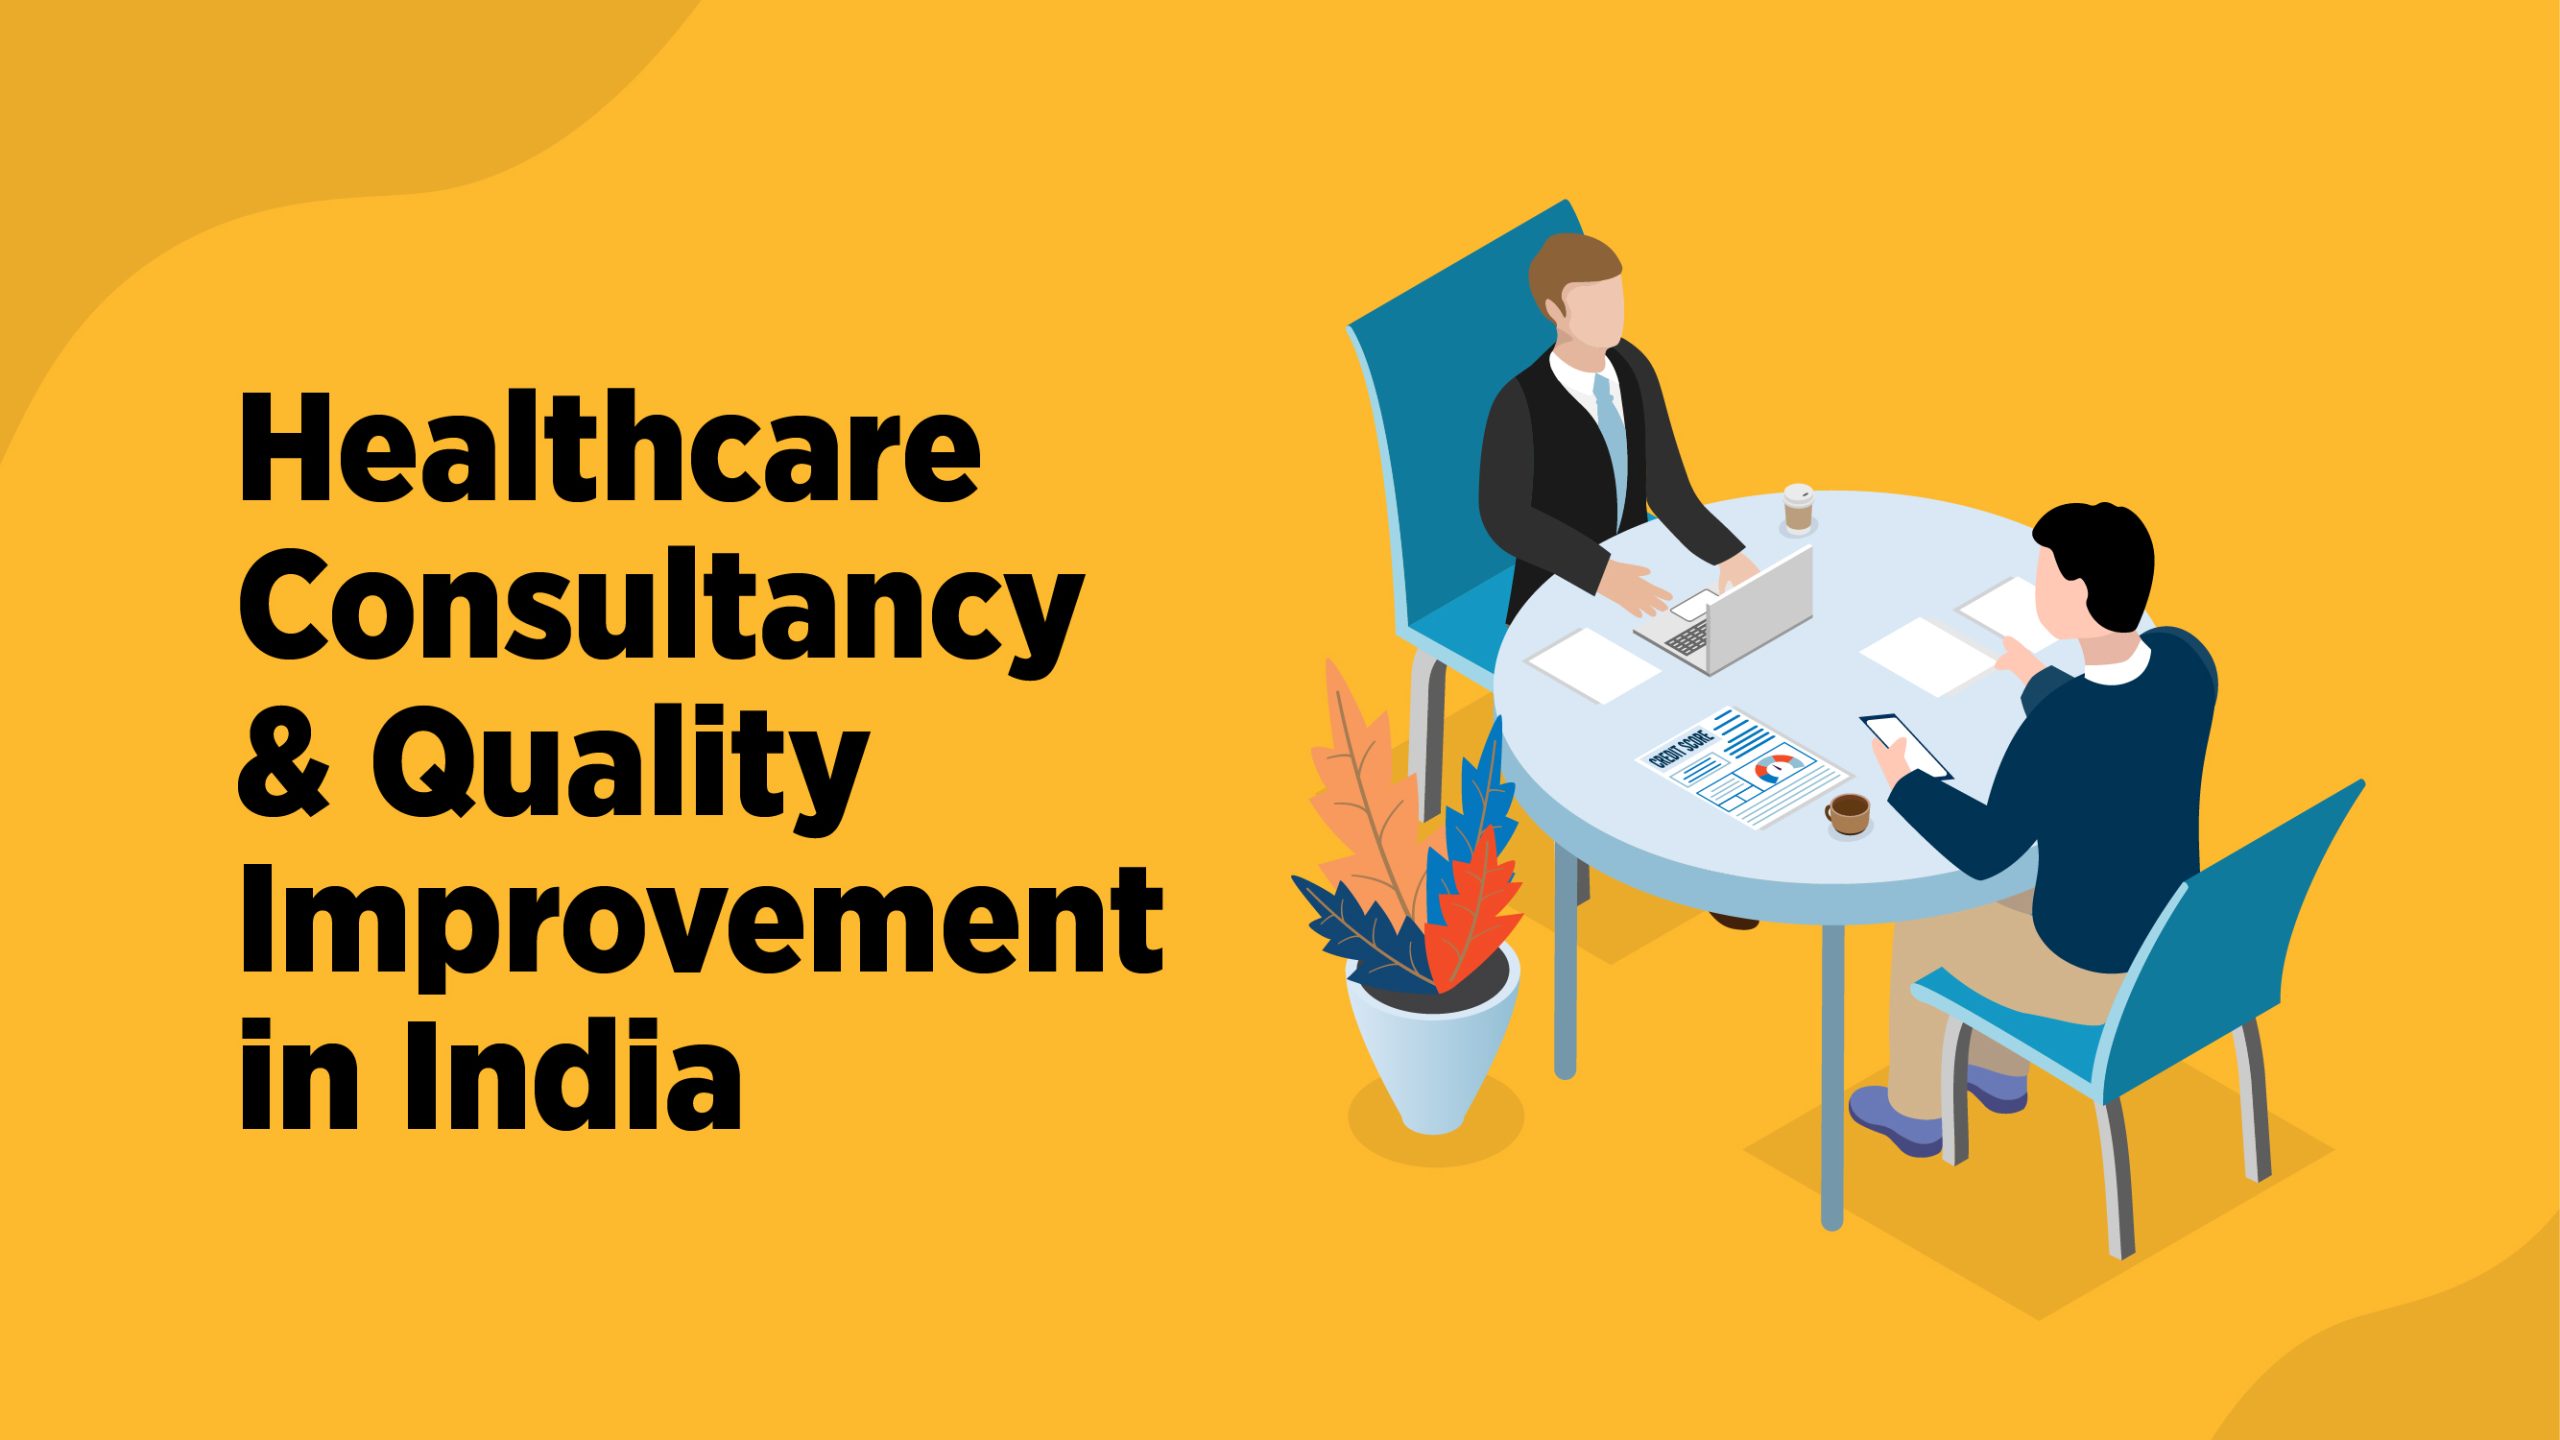 Healthcare Consultancy and Quality Improvement in India